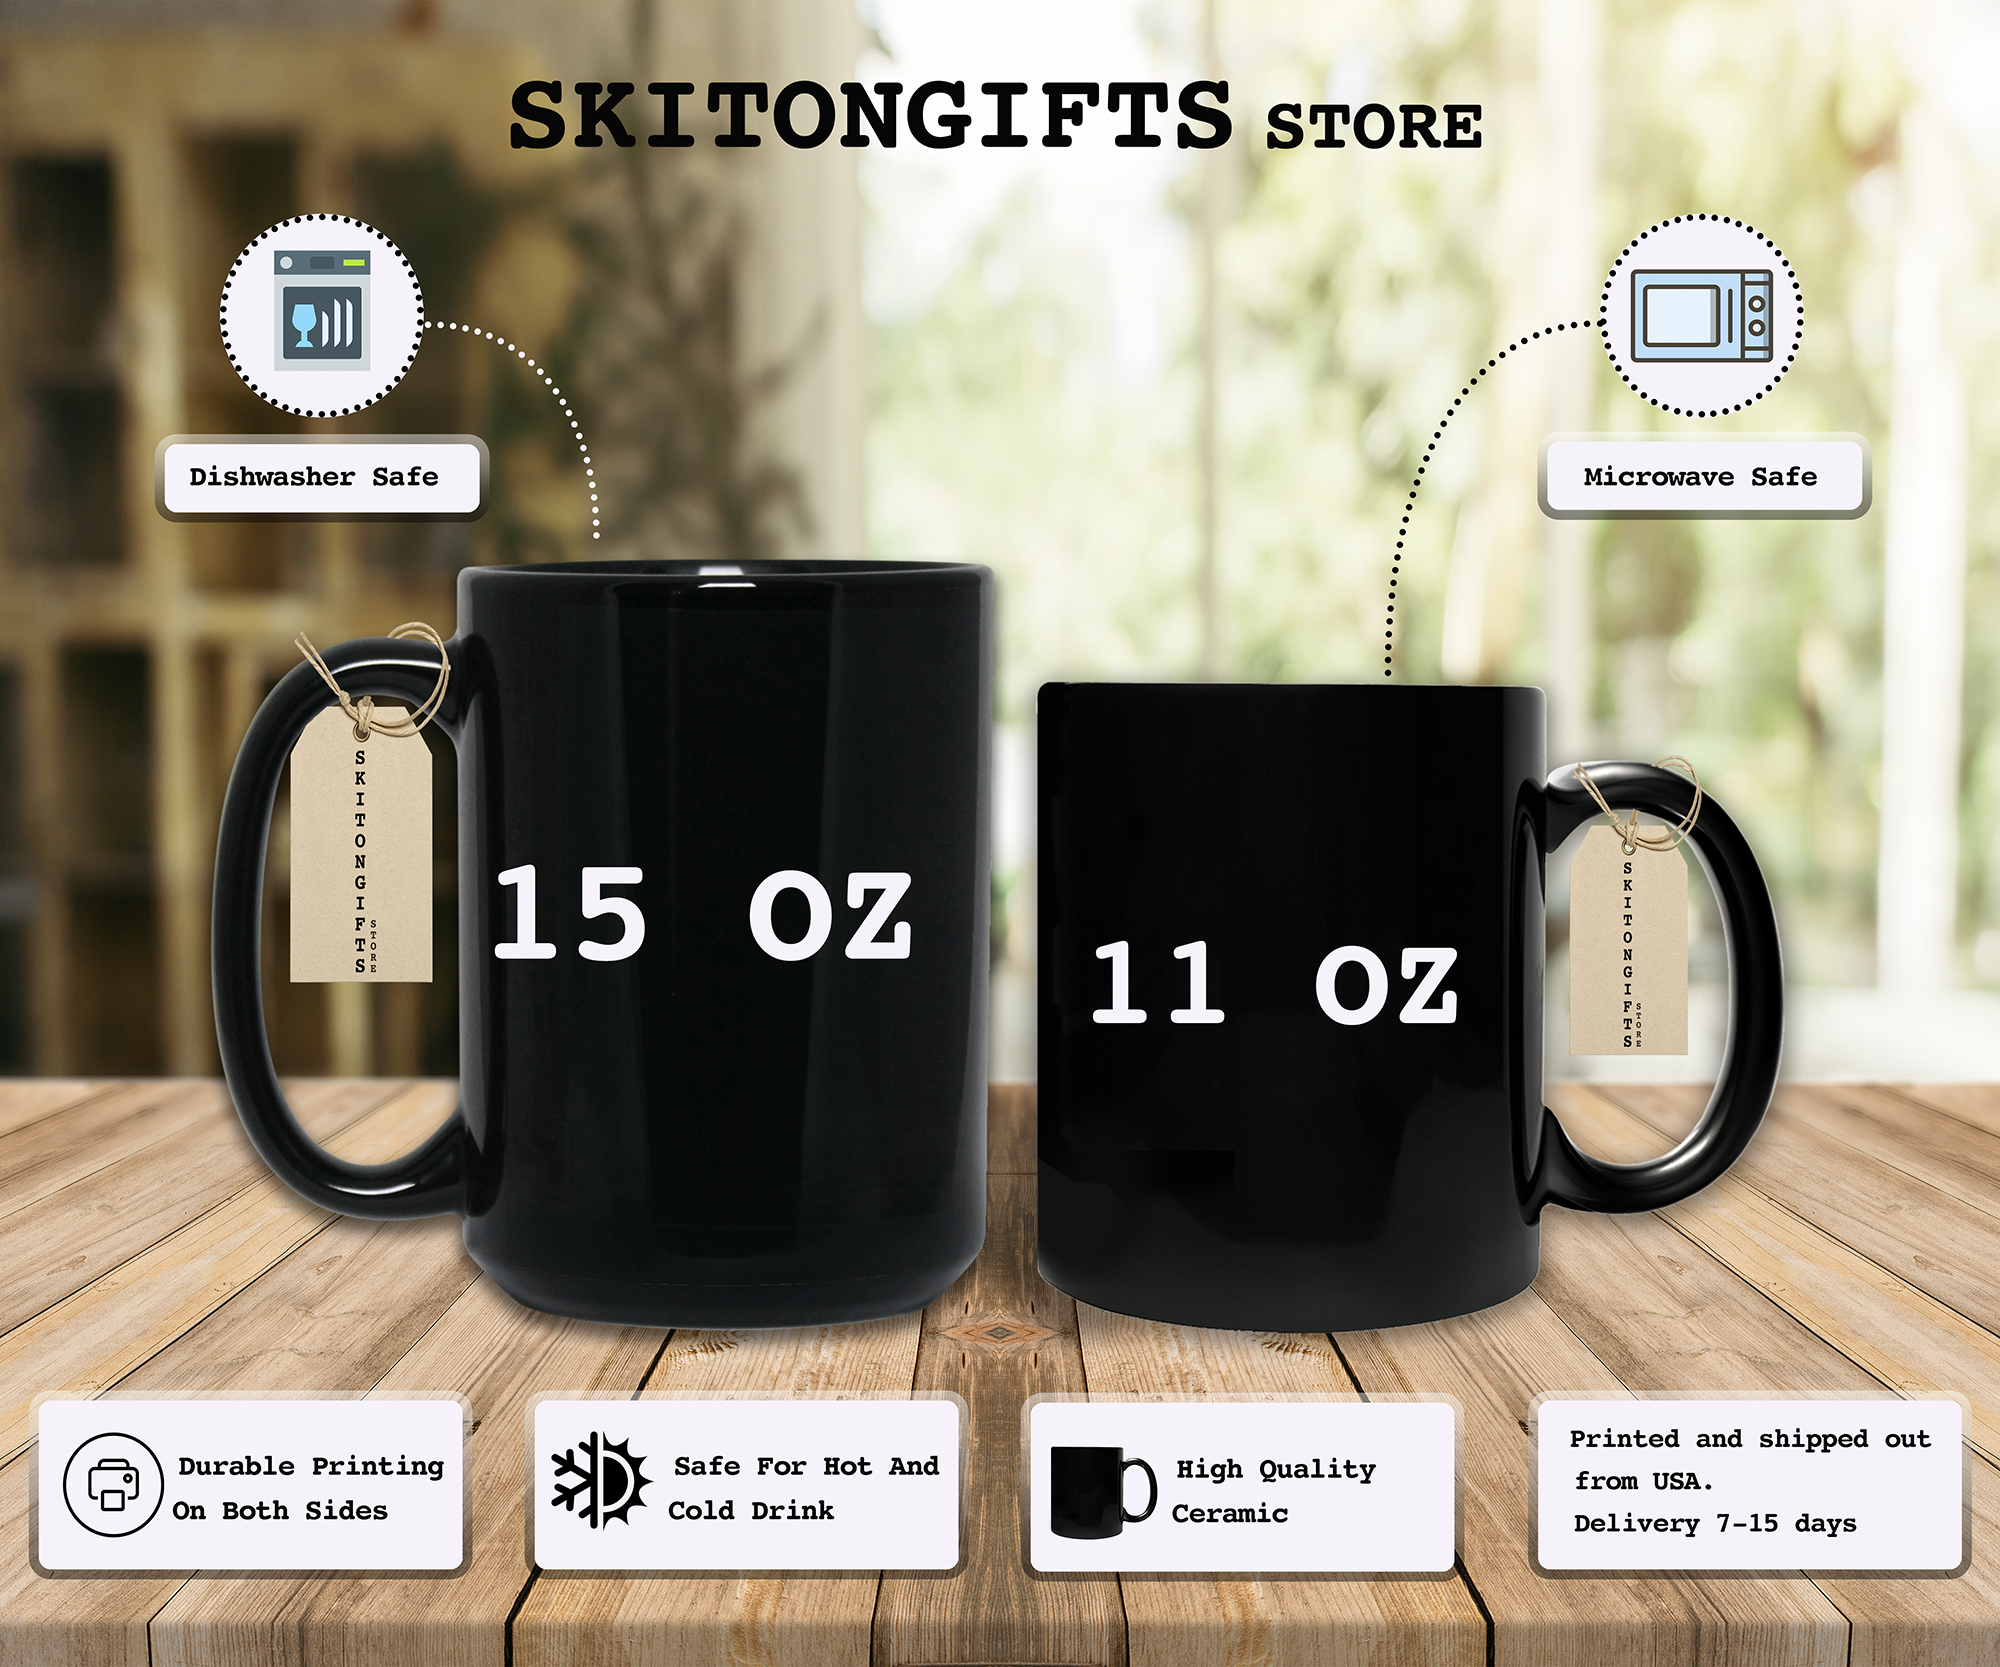 Skitongifts Funny Ceramic Novelty Coffee Mug Being My Wife Is Really The Only Gift You Need - Love You Wife Funny Gift Hb3Zng4